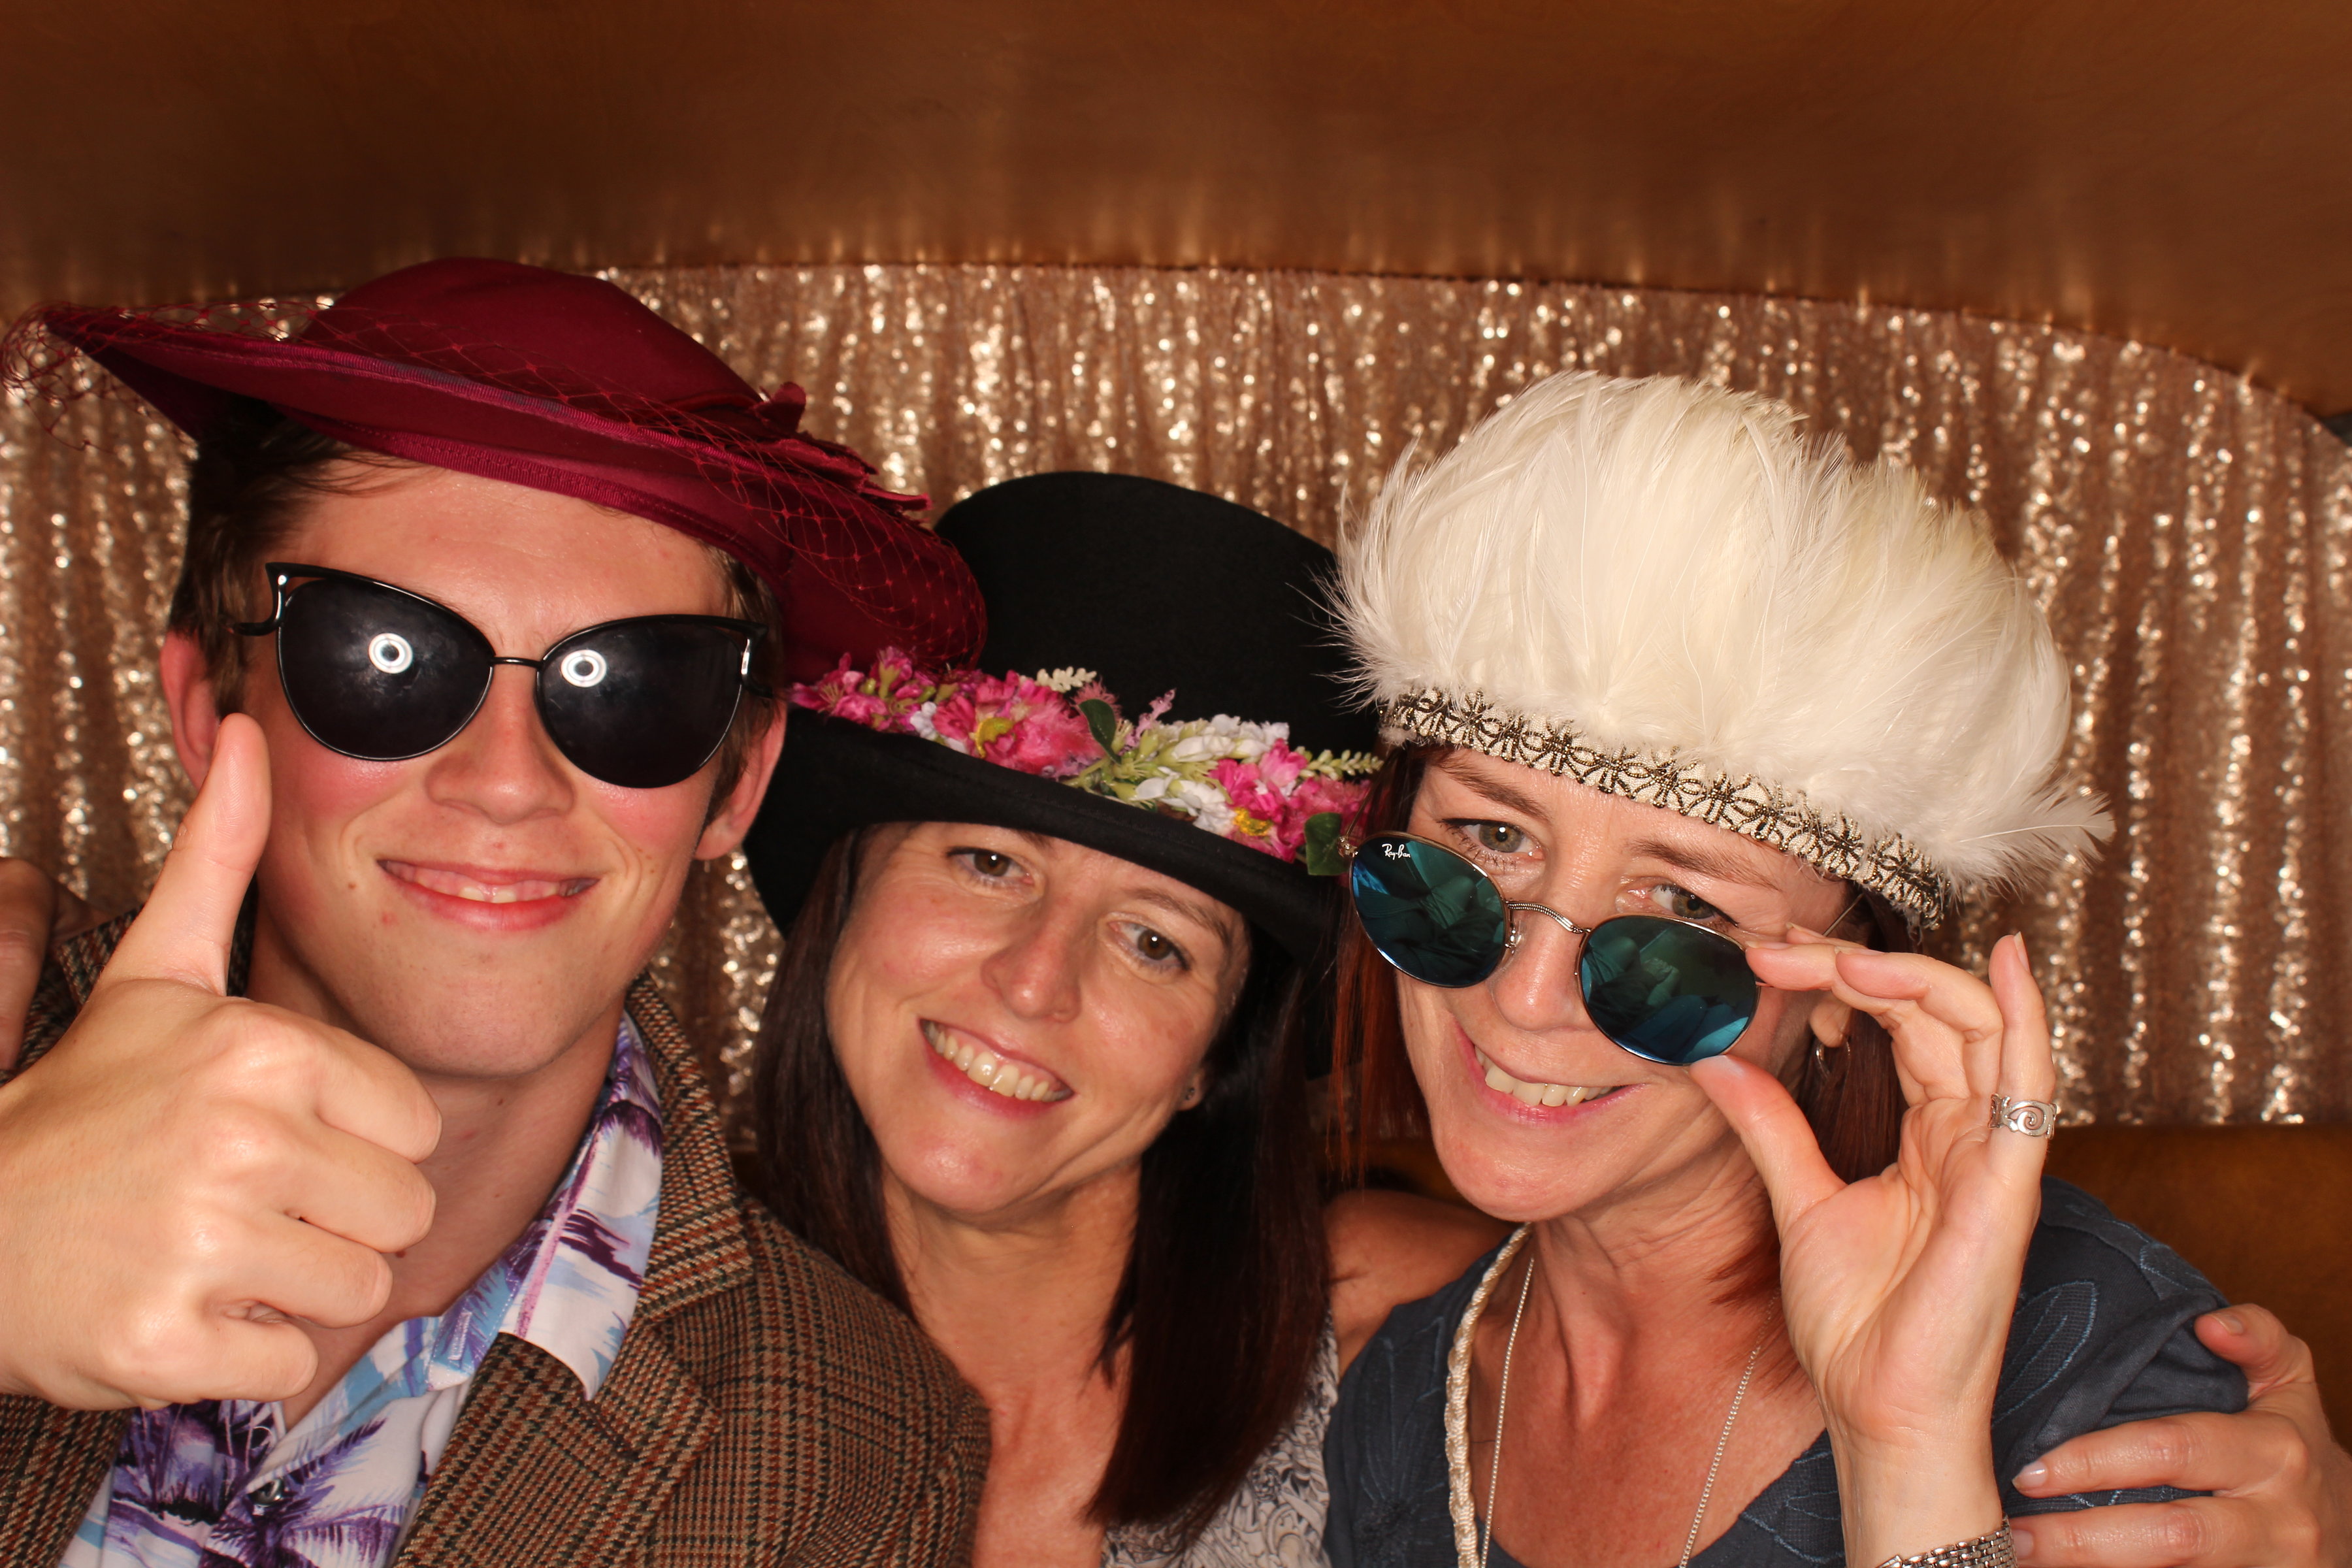 Mansfield Monk 25th anniversary celebrations - people dressed up in photo booth